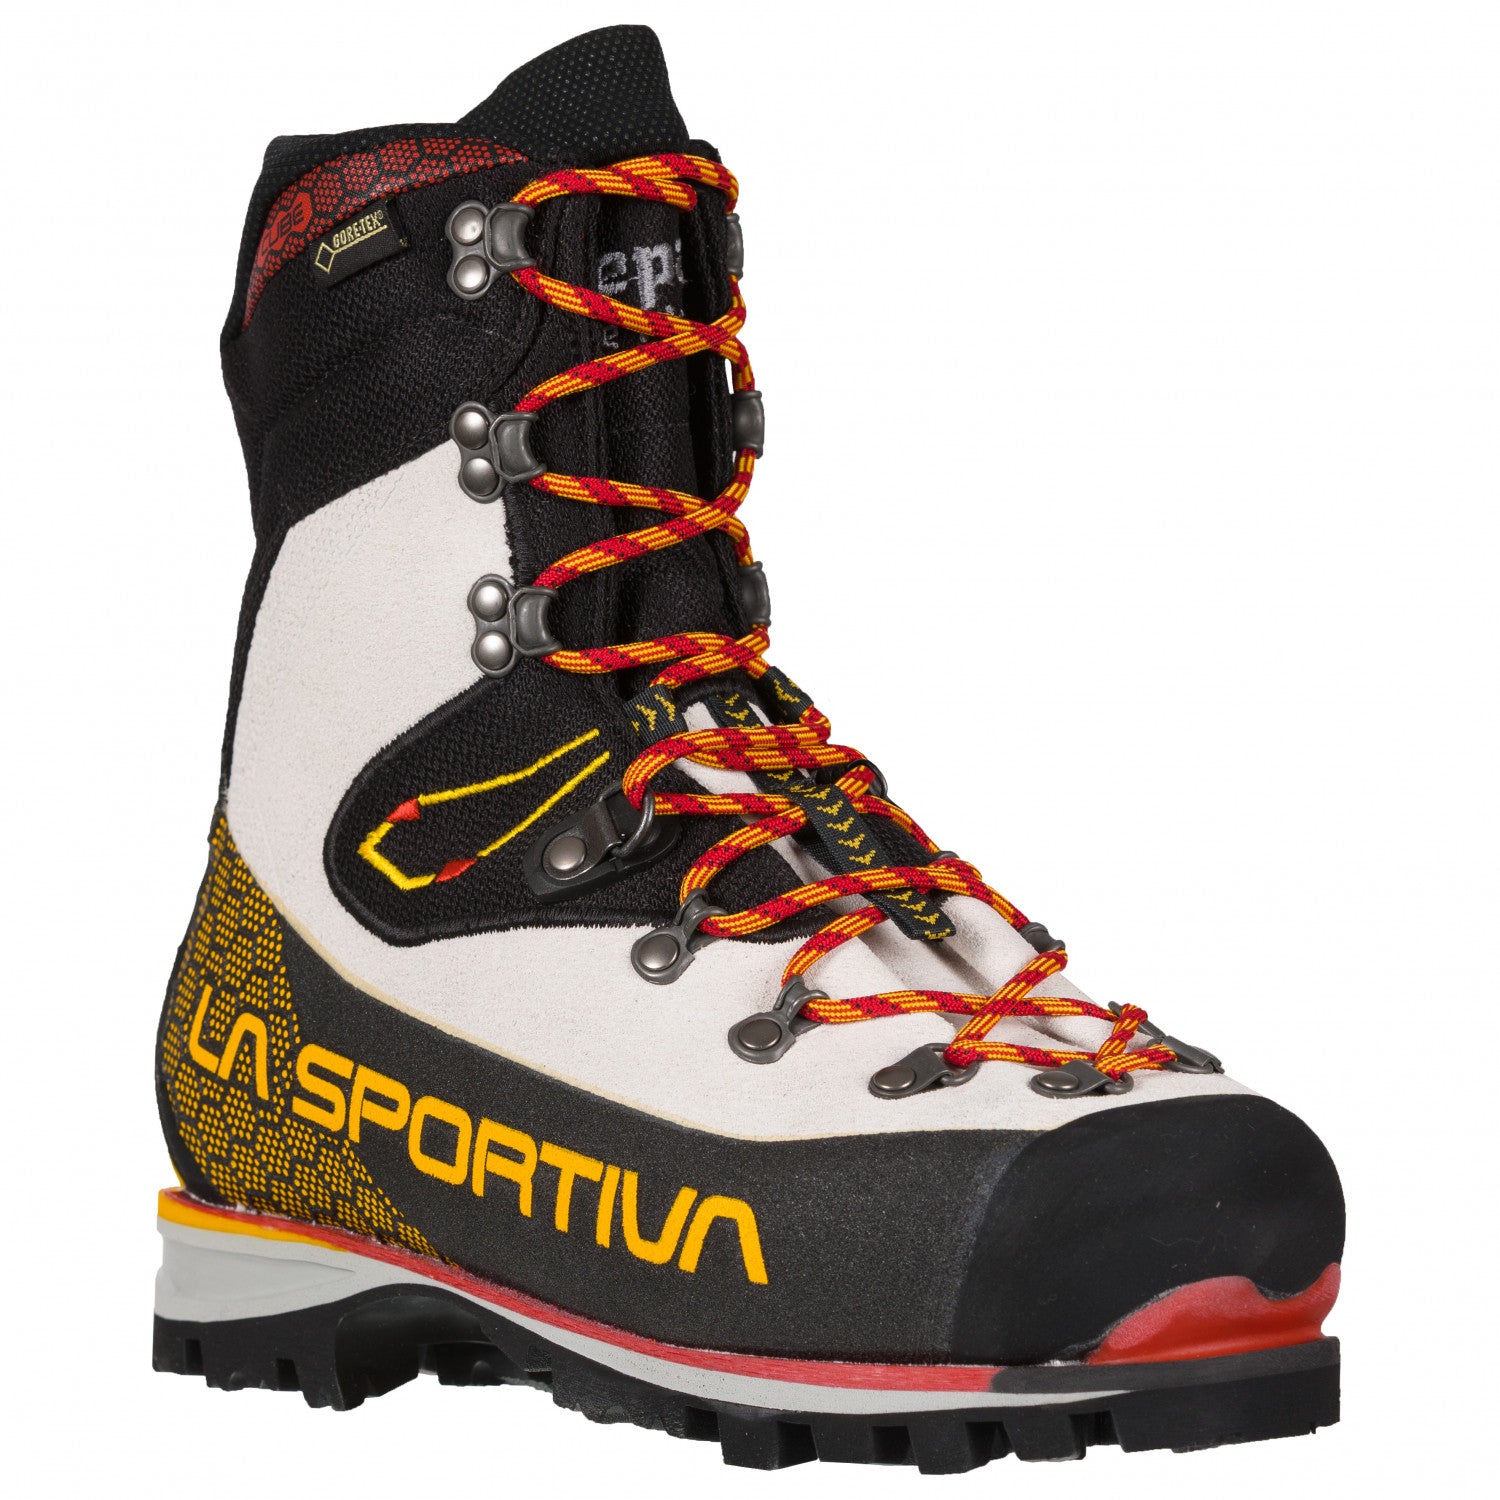 La Sportiva Nepal Cube GTX Womens mountaineering boot, front/side view